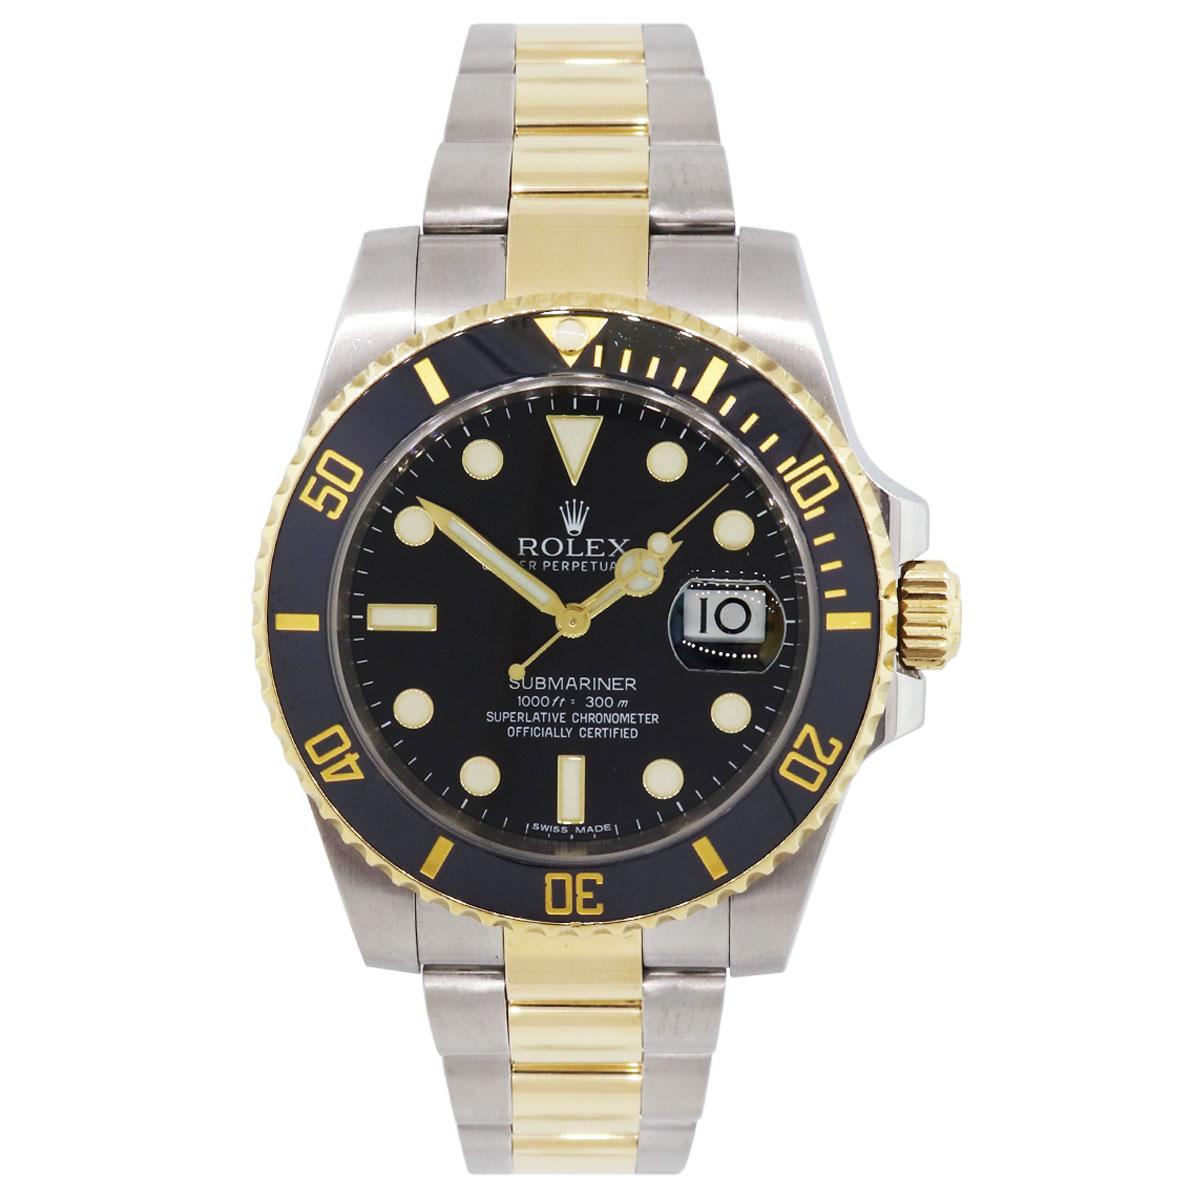 Brand: Rolex
Model: Submariner
MPN: 116613
Serial: “G” serial
Dial: Black dial
Bezel: Black ceramic bezel
Case Measurements: 40mm
Bracelet: Stainless steel and 18k yellow gold oyster band
Clasp: Fold Over Clasp
Movement: Automatic
Size: Will fit a